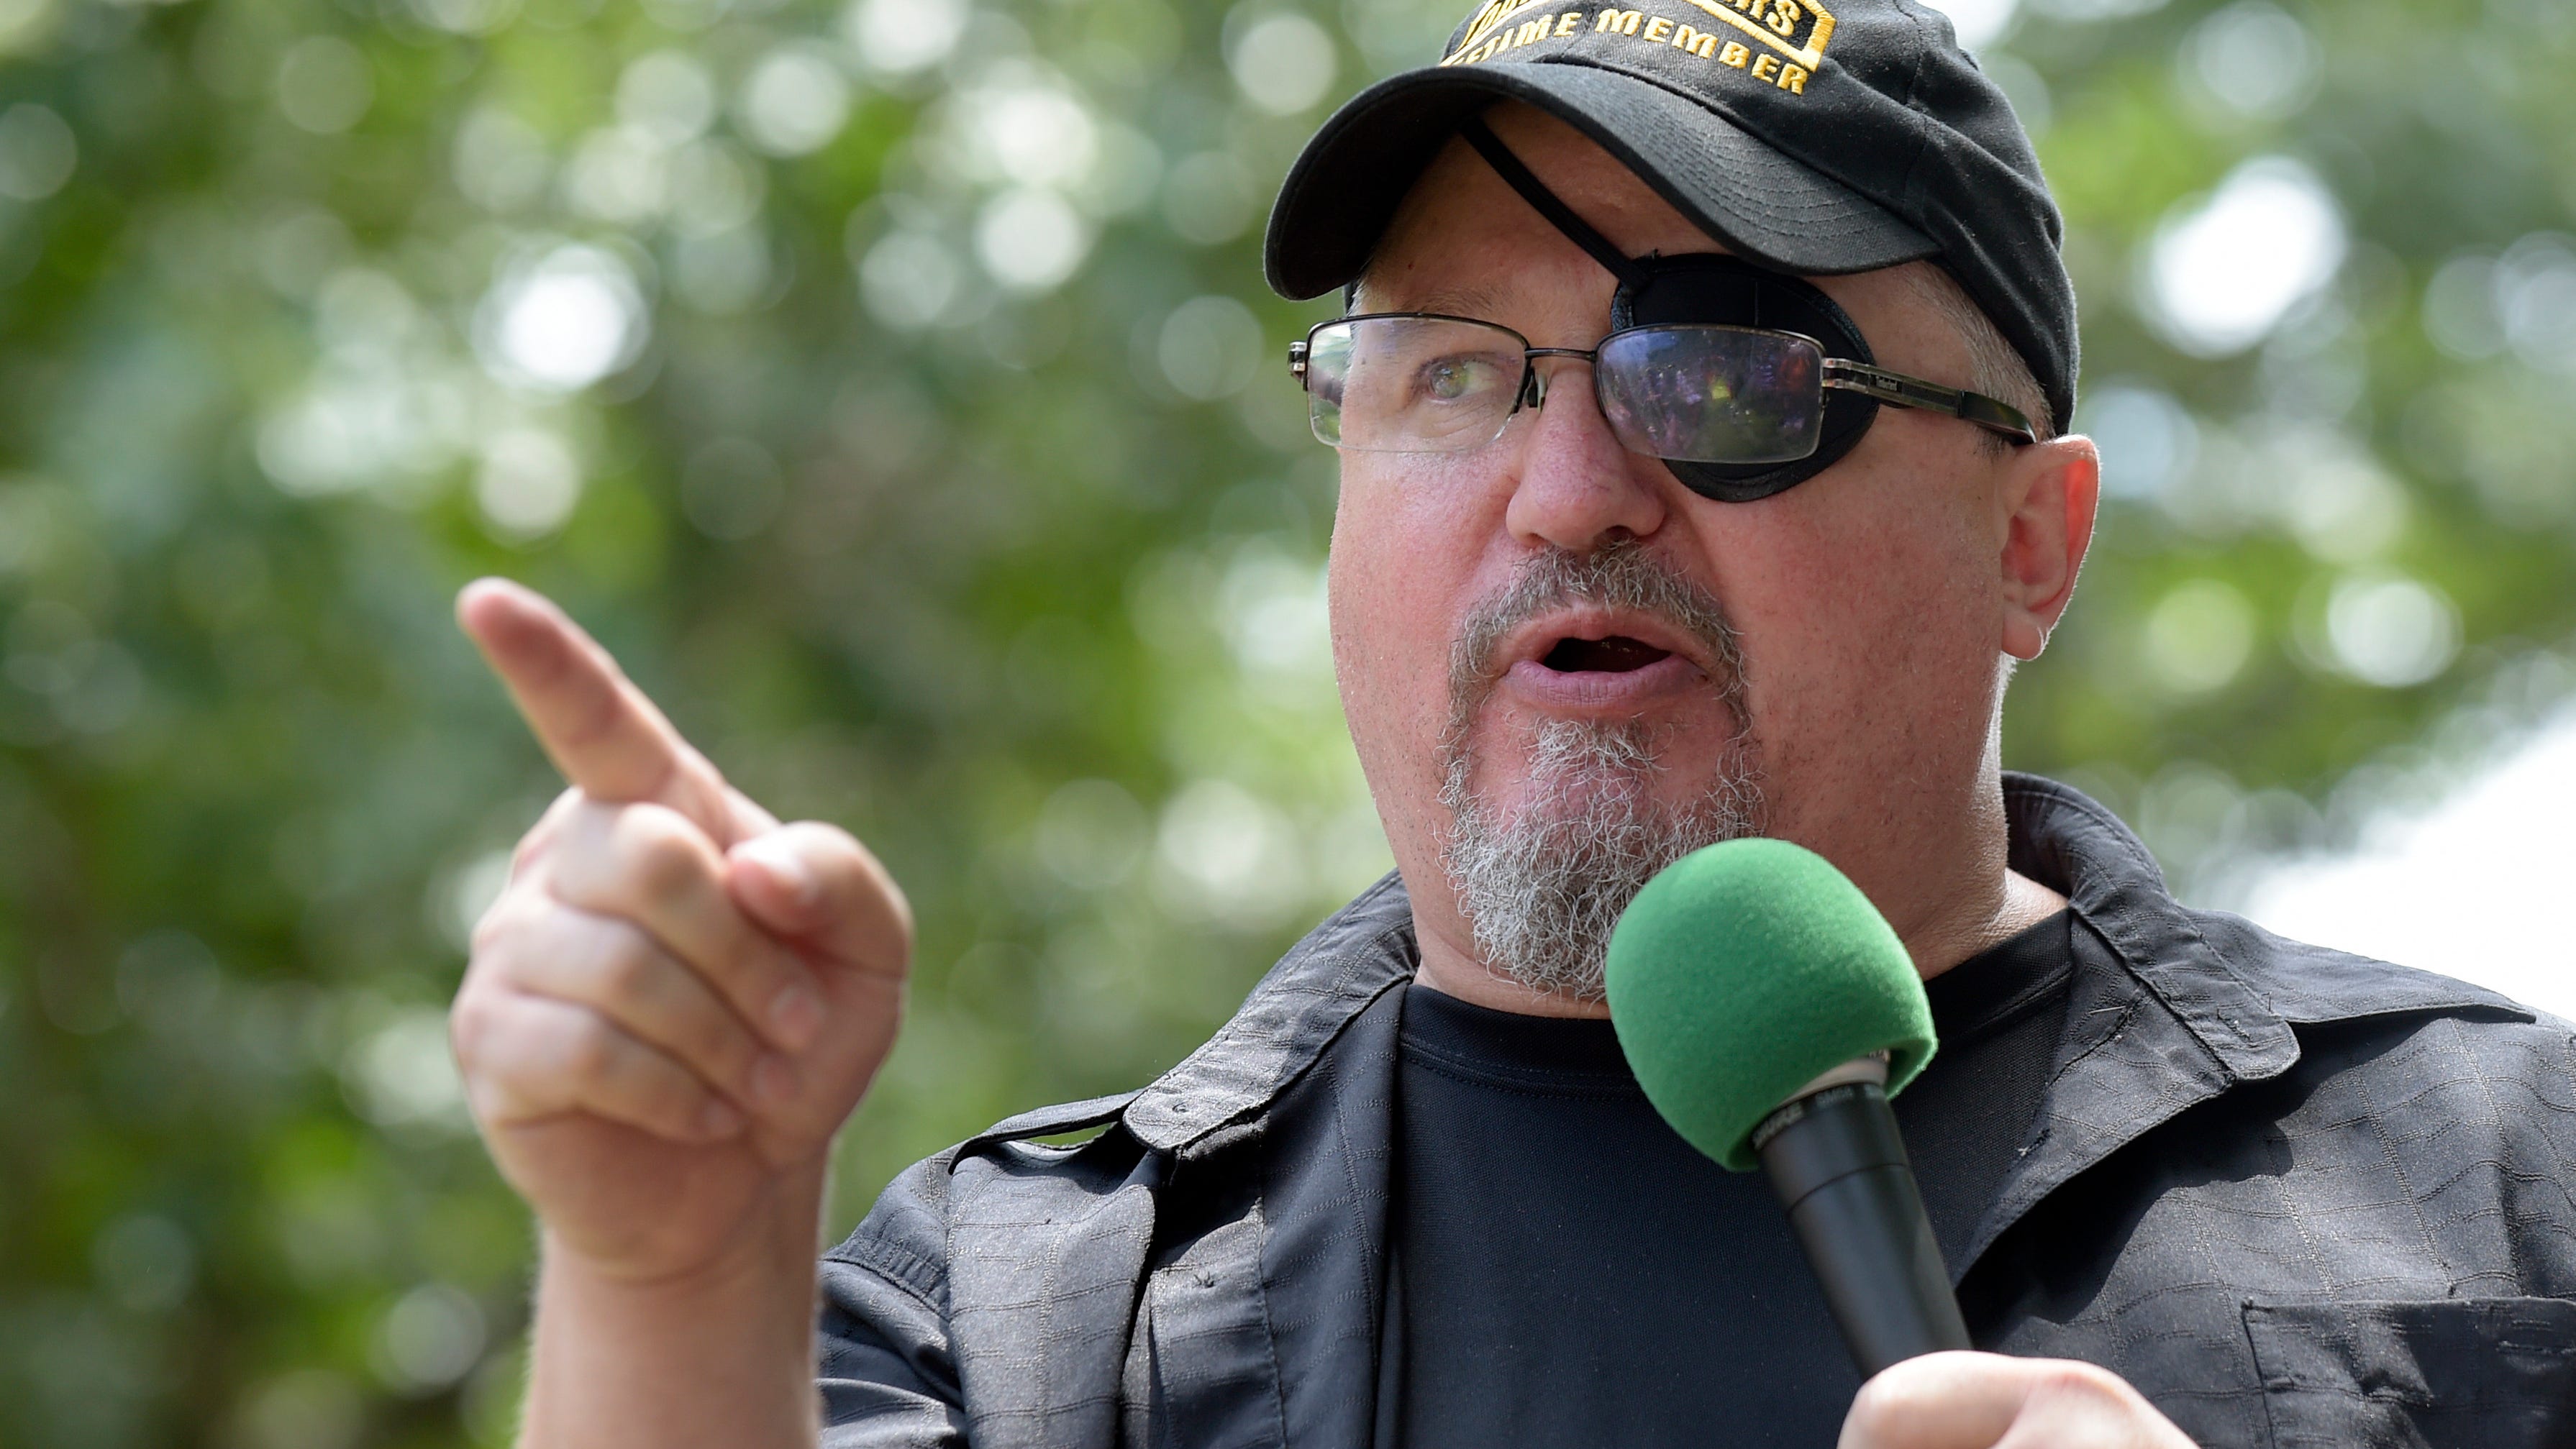 Stewart Rhodes, founder of the citizen militia group known as the Oath Keepers speaks during a rally outside the White House in Washington, on June 25, 2017. Rhodes formally launched the Oath Keepers in Lexington, Massachusetts, on April 19, 2009, where the first shot in the American Revolution was fired. (AP Photo/Susan Walsh, File)